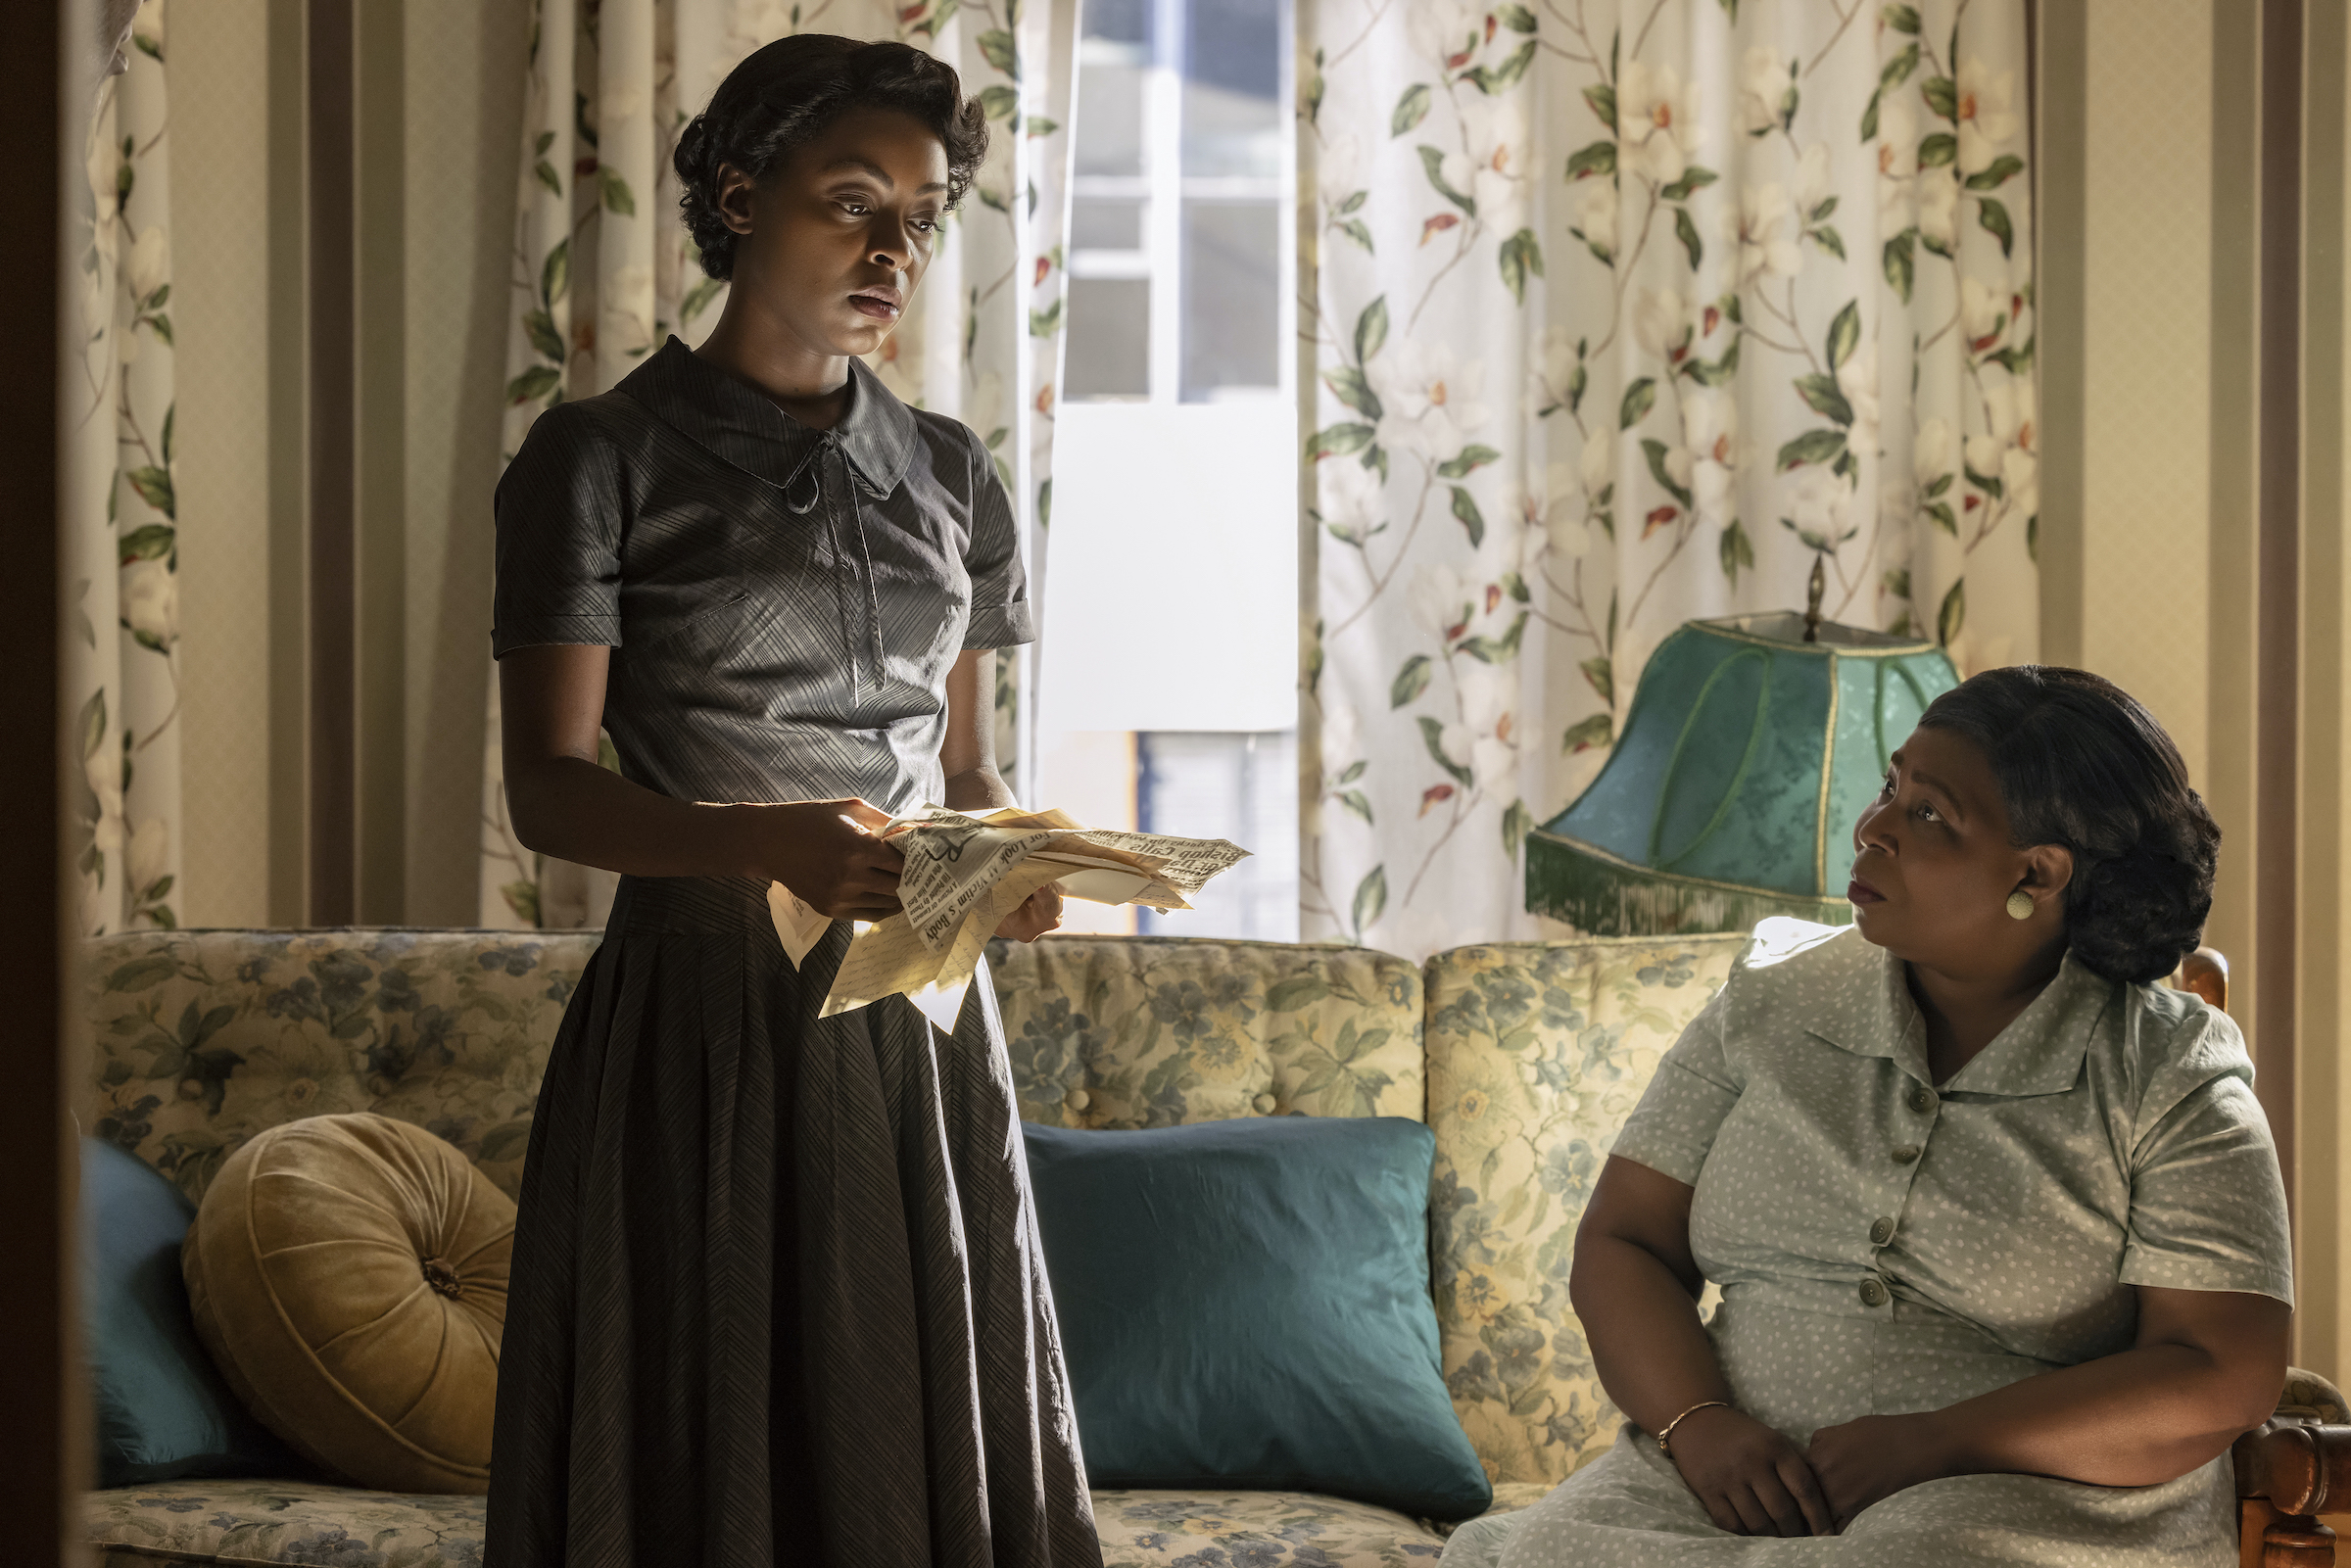 (L to R) Danielle Deadwyler as Mamie Till Mobley and Whoopi Goldberg as Alma Carthan in TILL, directed by Chinonye Chukwu, released by Orion Pictures. 
                      
                      Credit: Lynsey Weatherspoon / Orion Pictures 
                      
                      © 2022 ORION RELEASING LLC. All Rights Reserved. (Lynsey Weatherspoon —Orion Pictures)